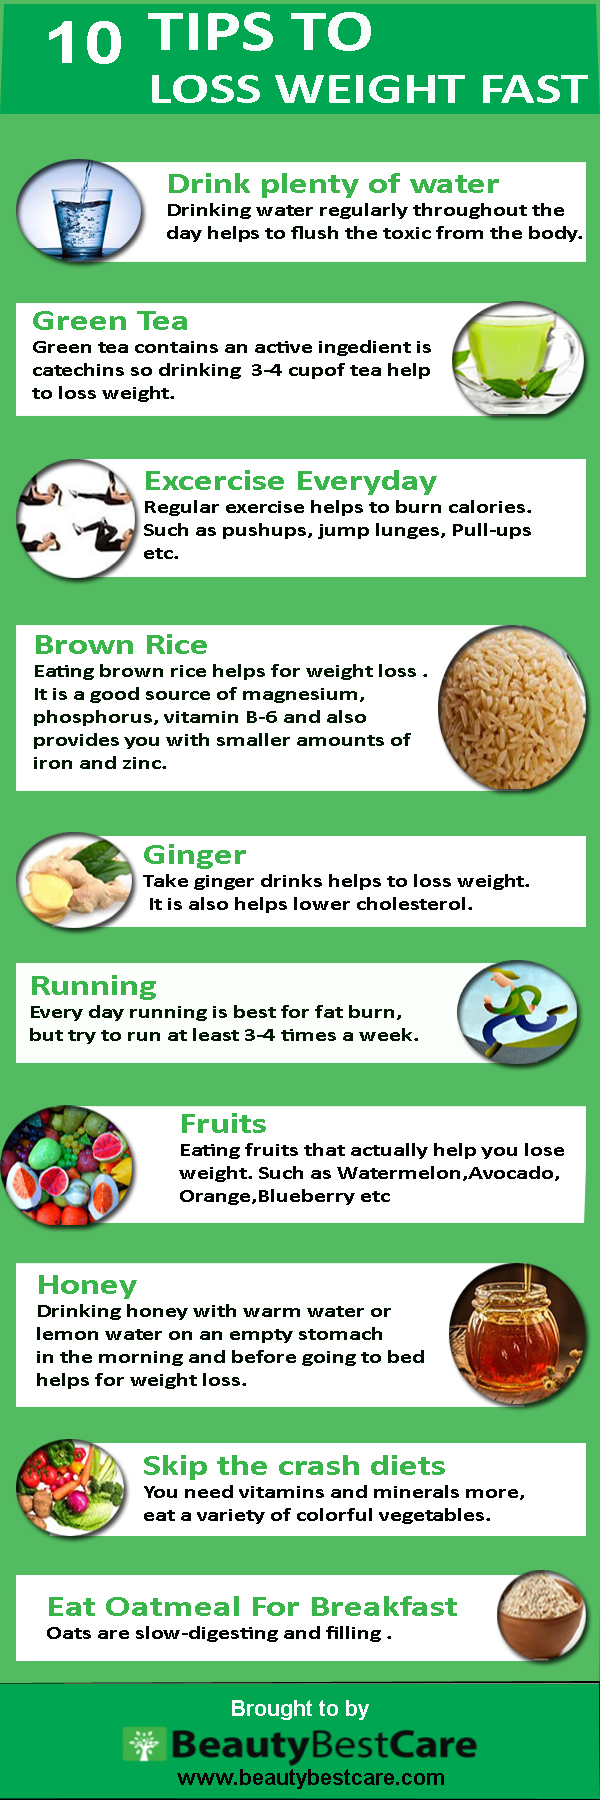 17 Weight Loss Tips For Women [Infographic] - BeautyBestCare